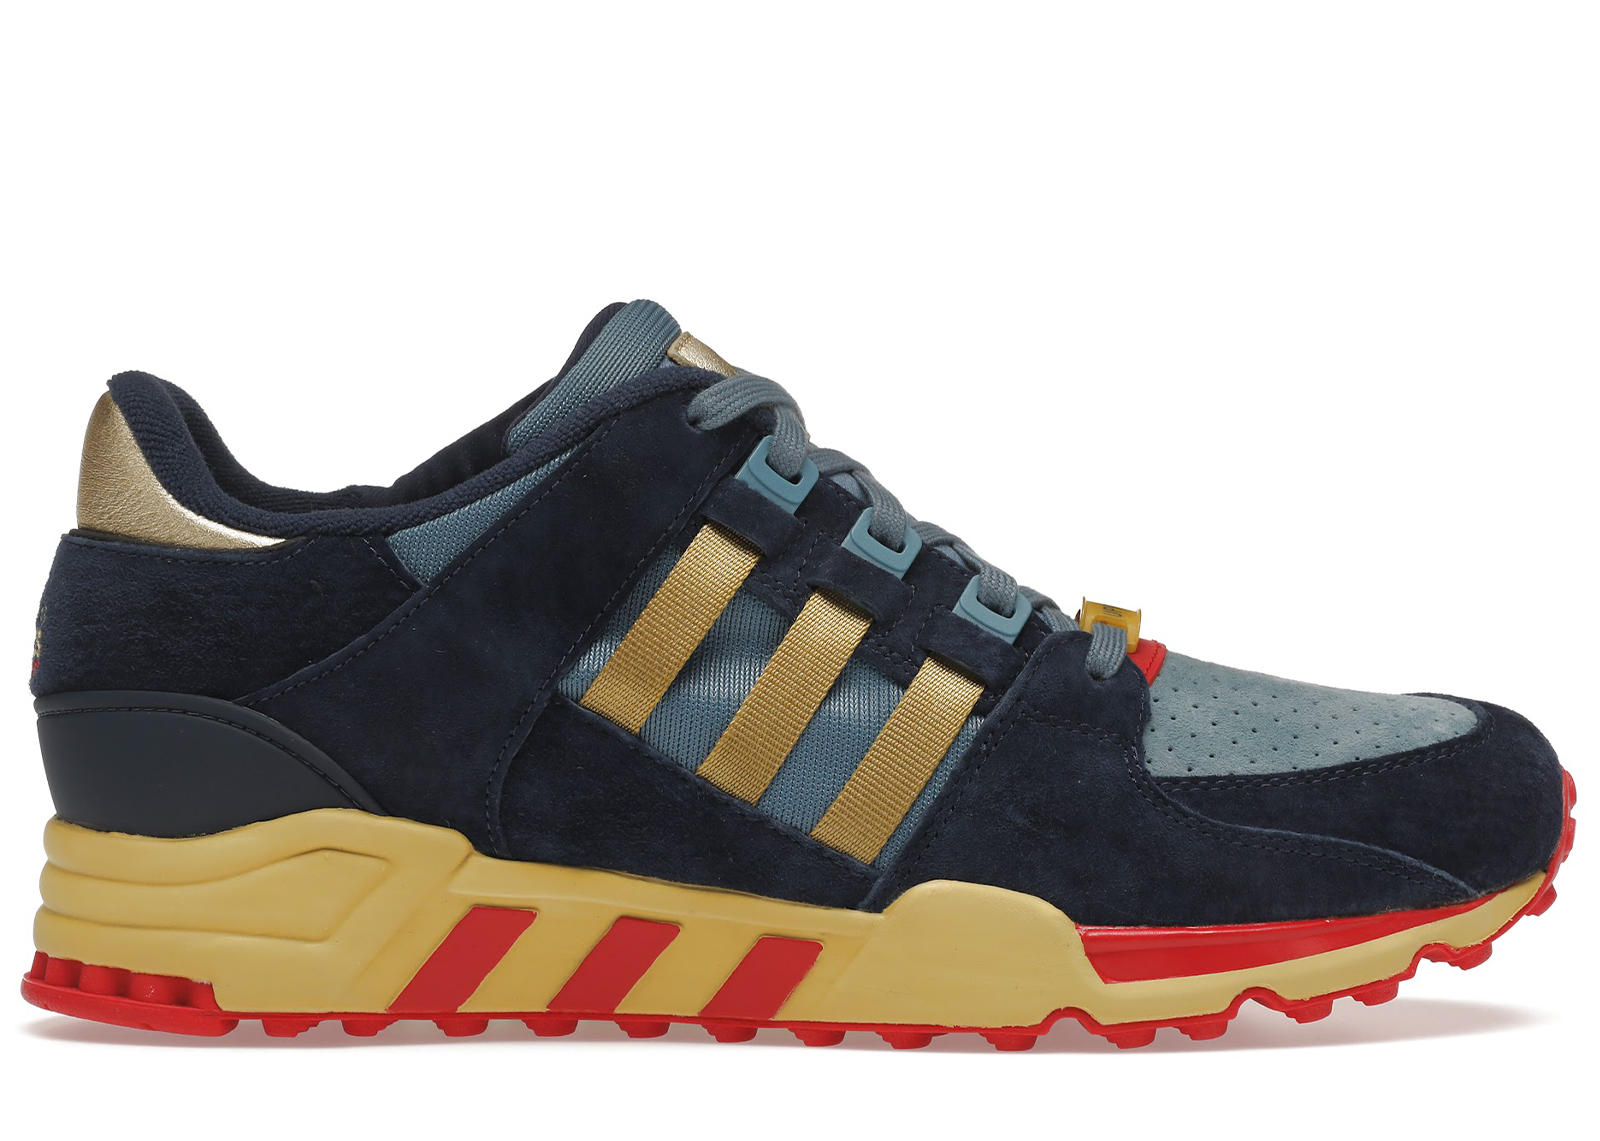 adidas-eqt-running-support-93-packer-shoes-sl 80